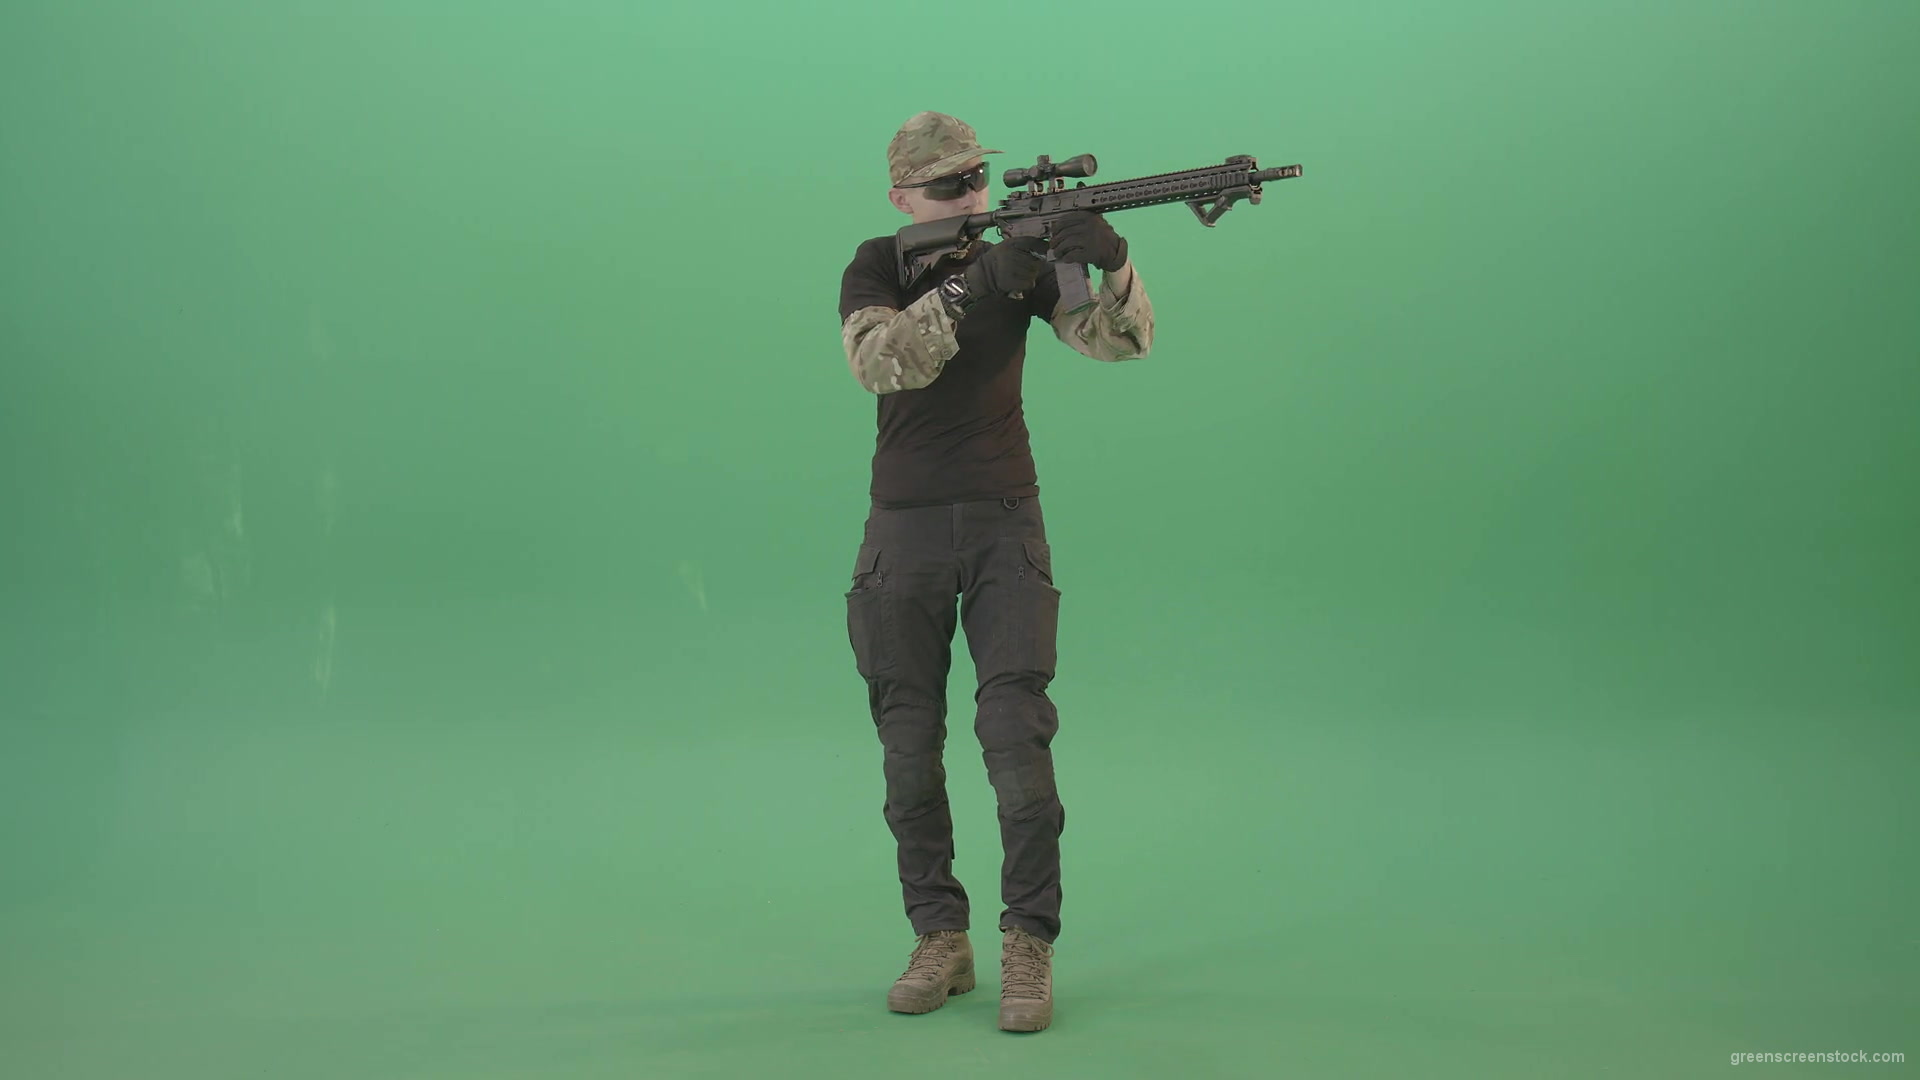 Man-in-Military-uniform-shooting-with-Army-machine-gun-isolated-on-Green-Screen-4K-Video-Footage-1920_008 Green Screen Stock